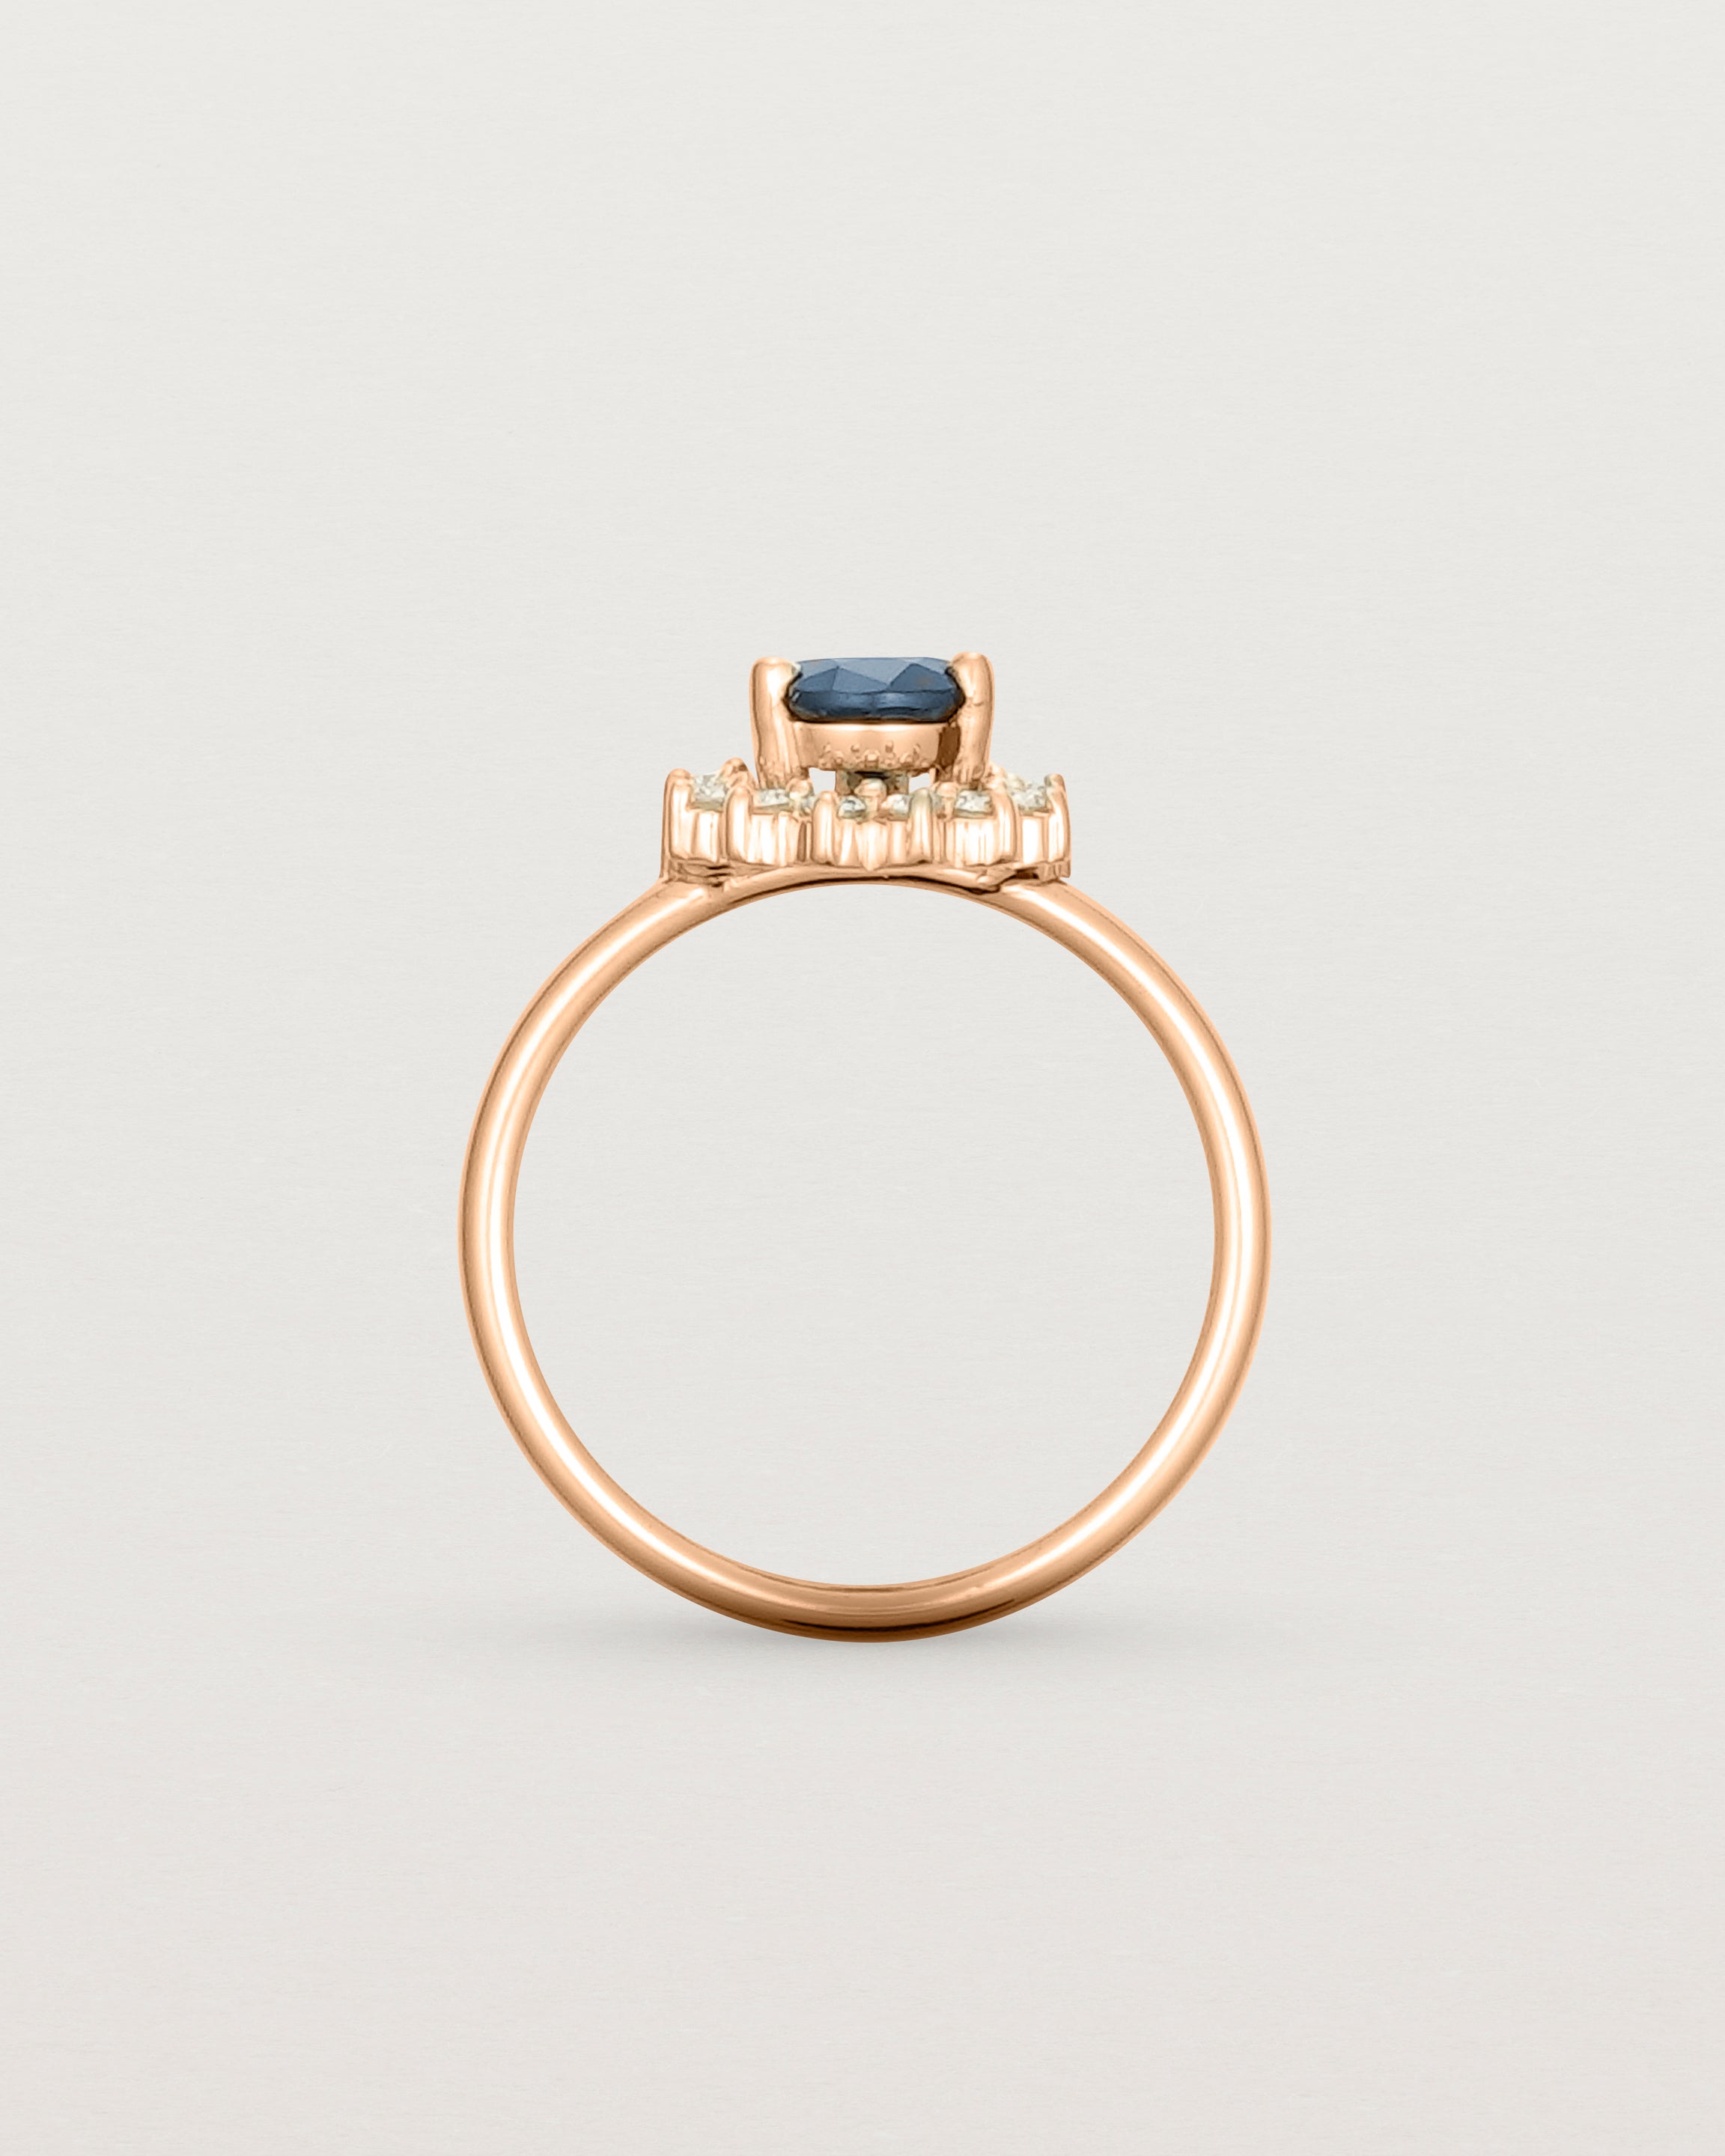 Standing view of the Posie Ring | Rutilated Quartz & Diamonds | Rose Gold.